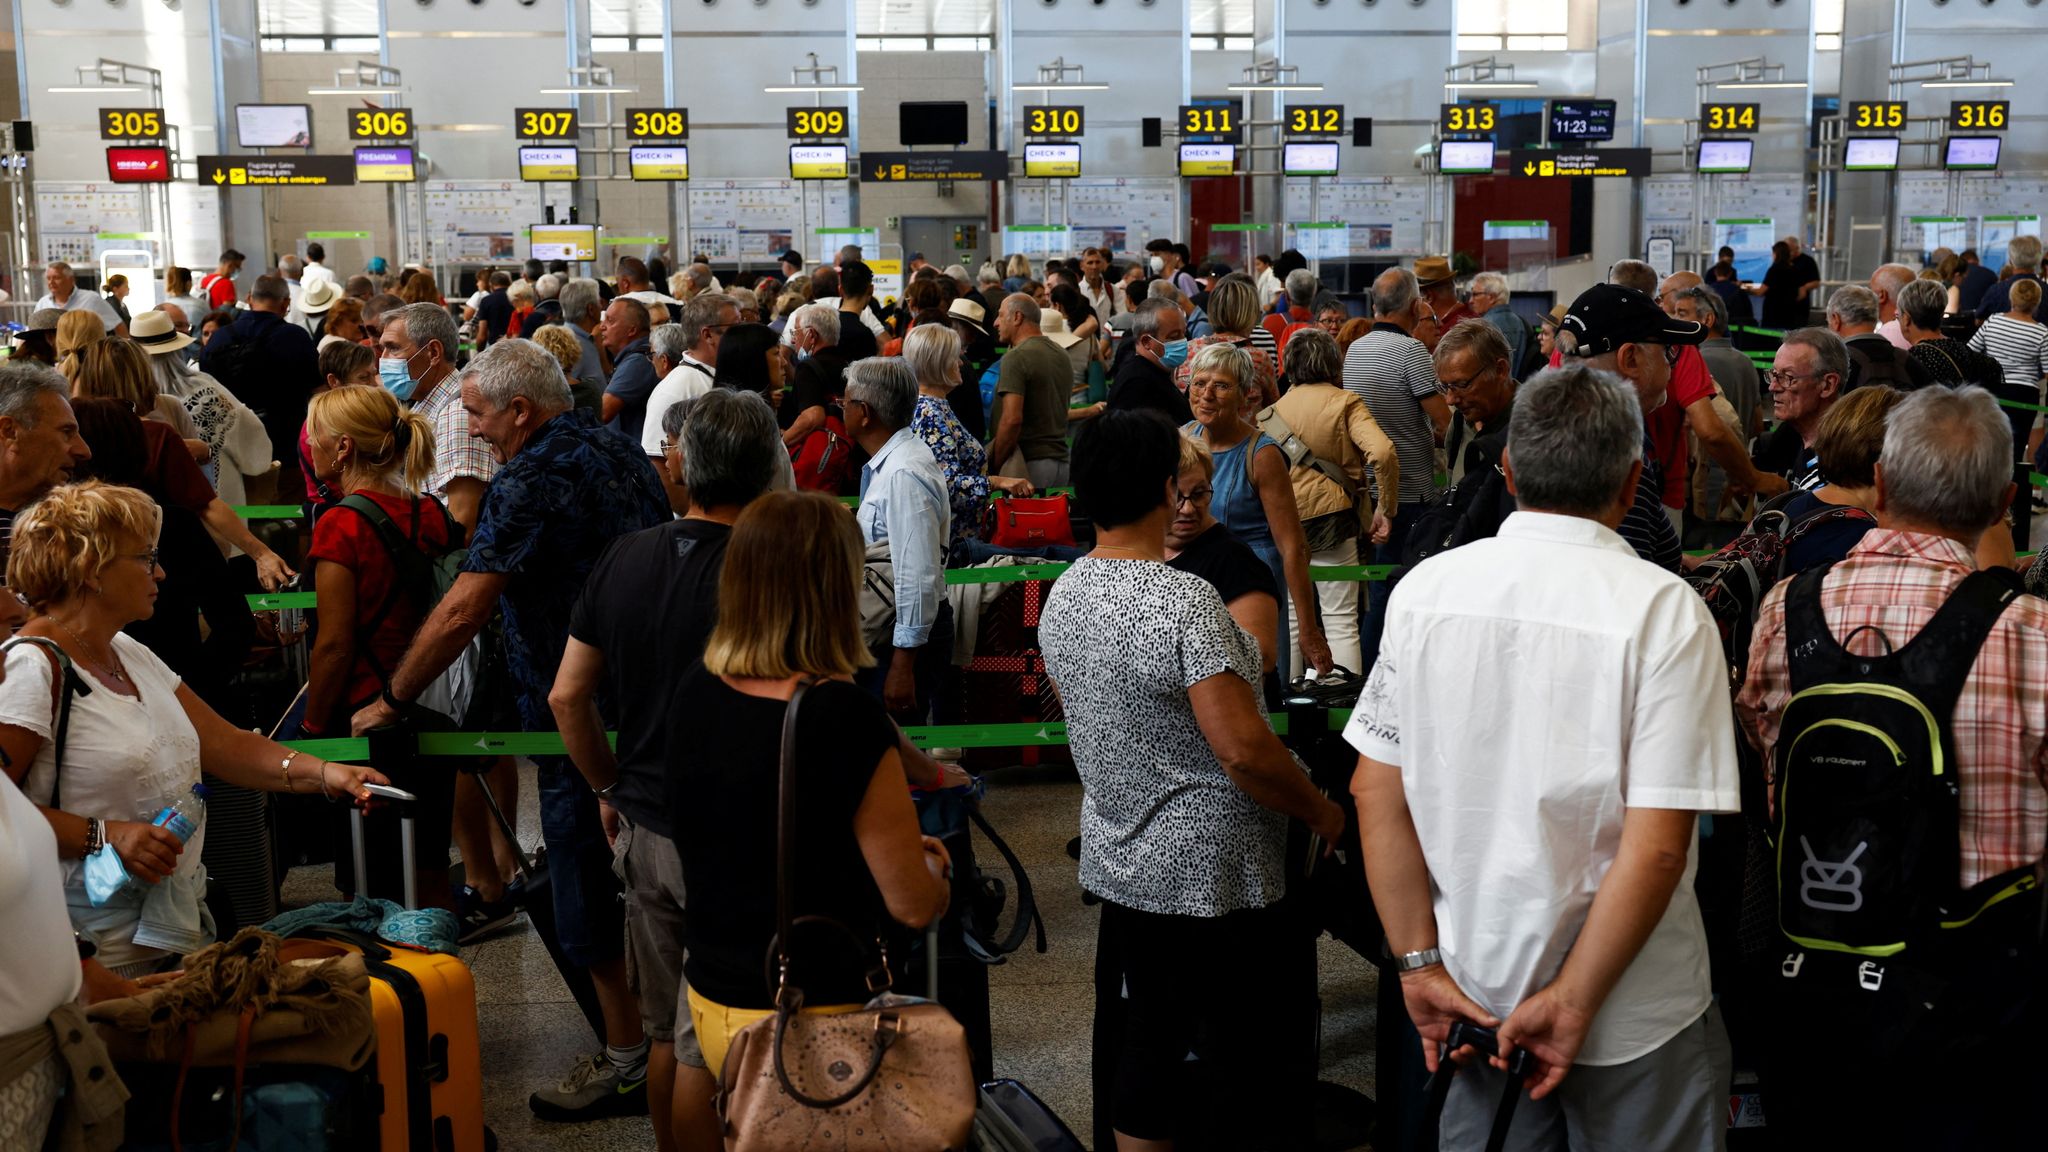 More than 200 flights were canceled due to a strike in Italy